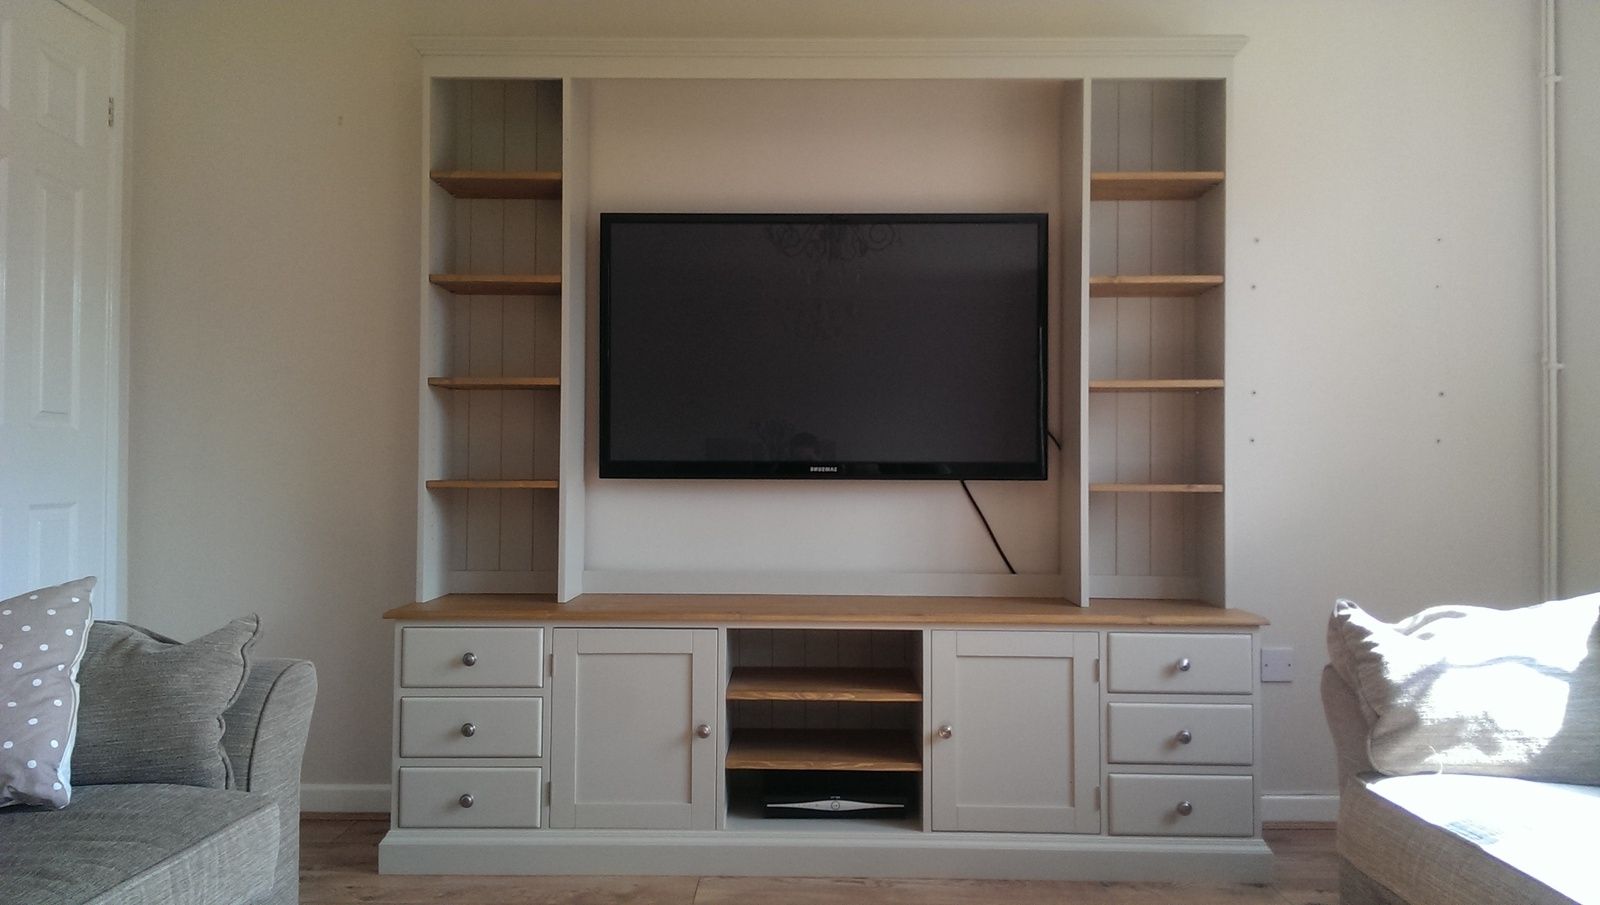 Bespoke Tv Unit With Regard To Well Known Tv / Entertainment Unit – Bespoke Living Room Furniture – Pine (View 1 of 15)